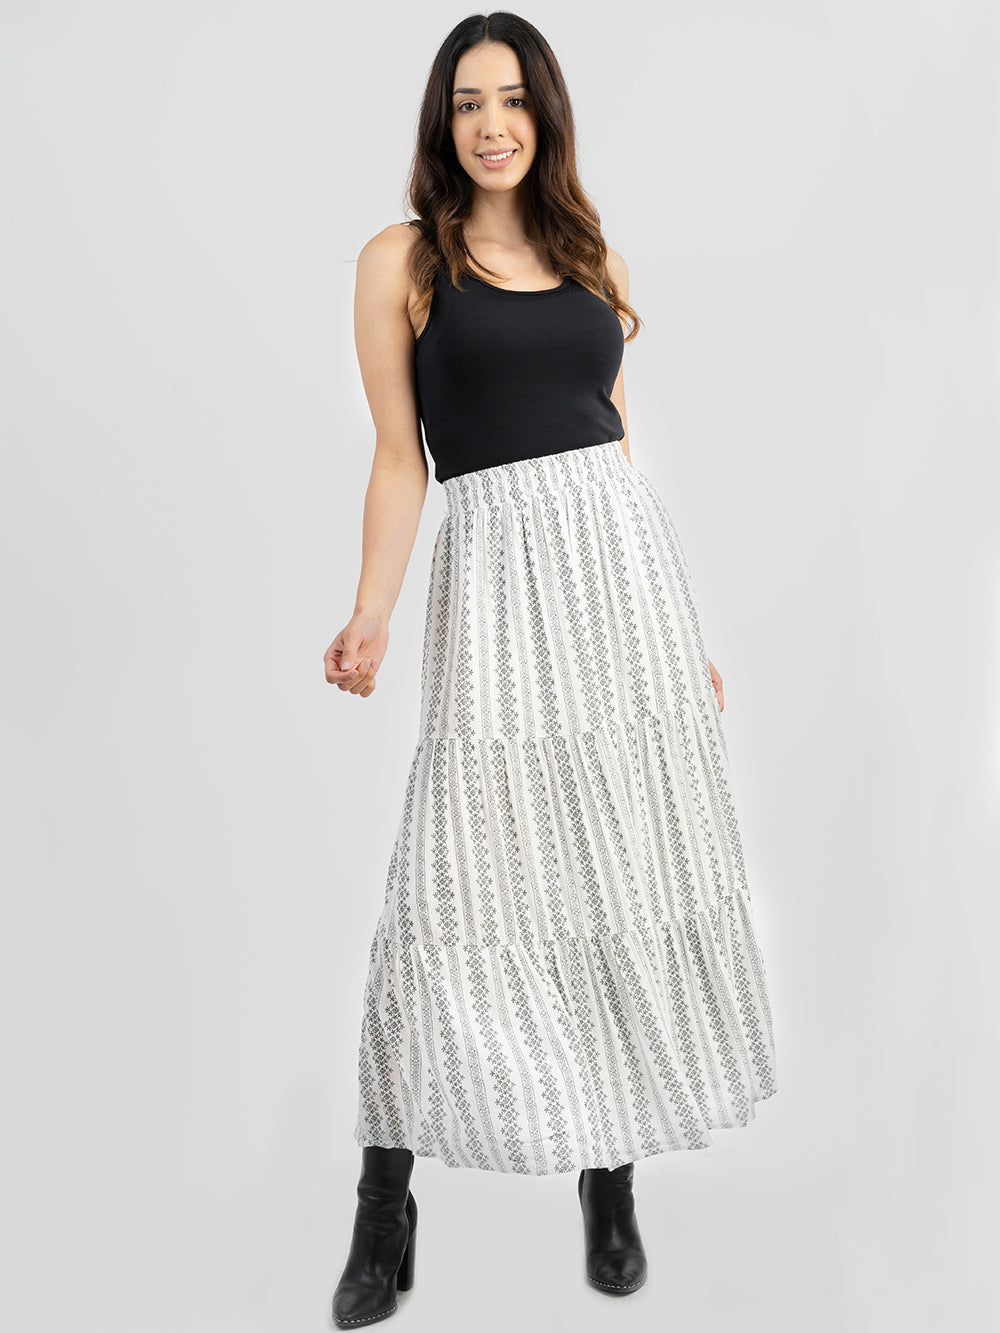 Women Floral Print Layered Skirt - Cowgirl Wear